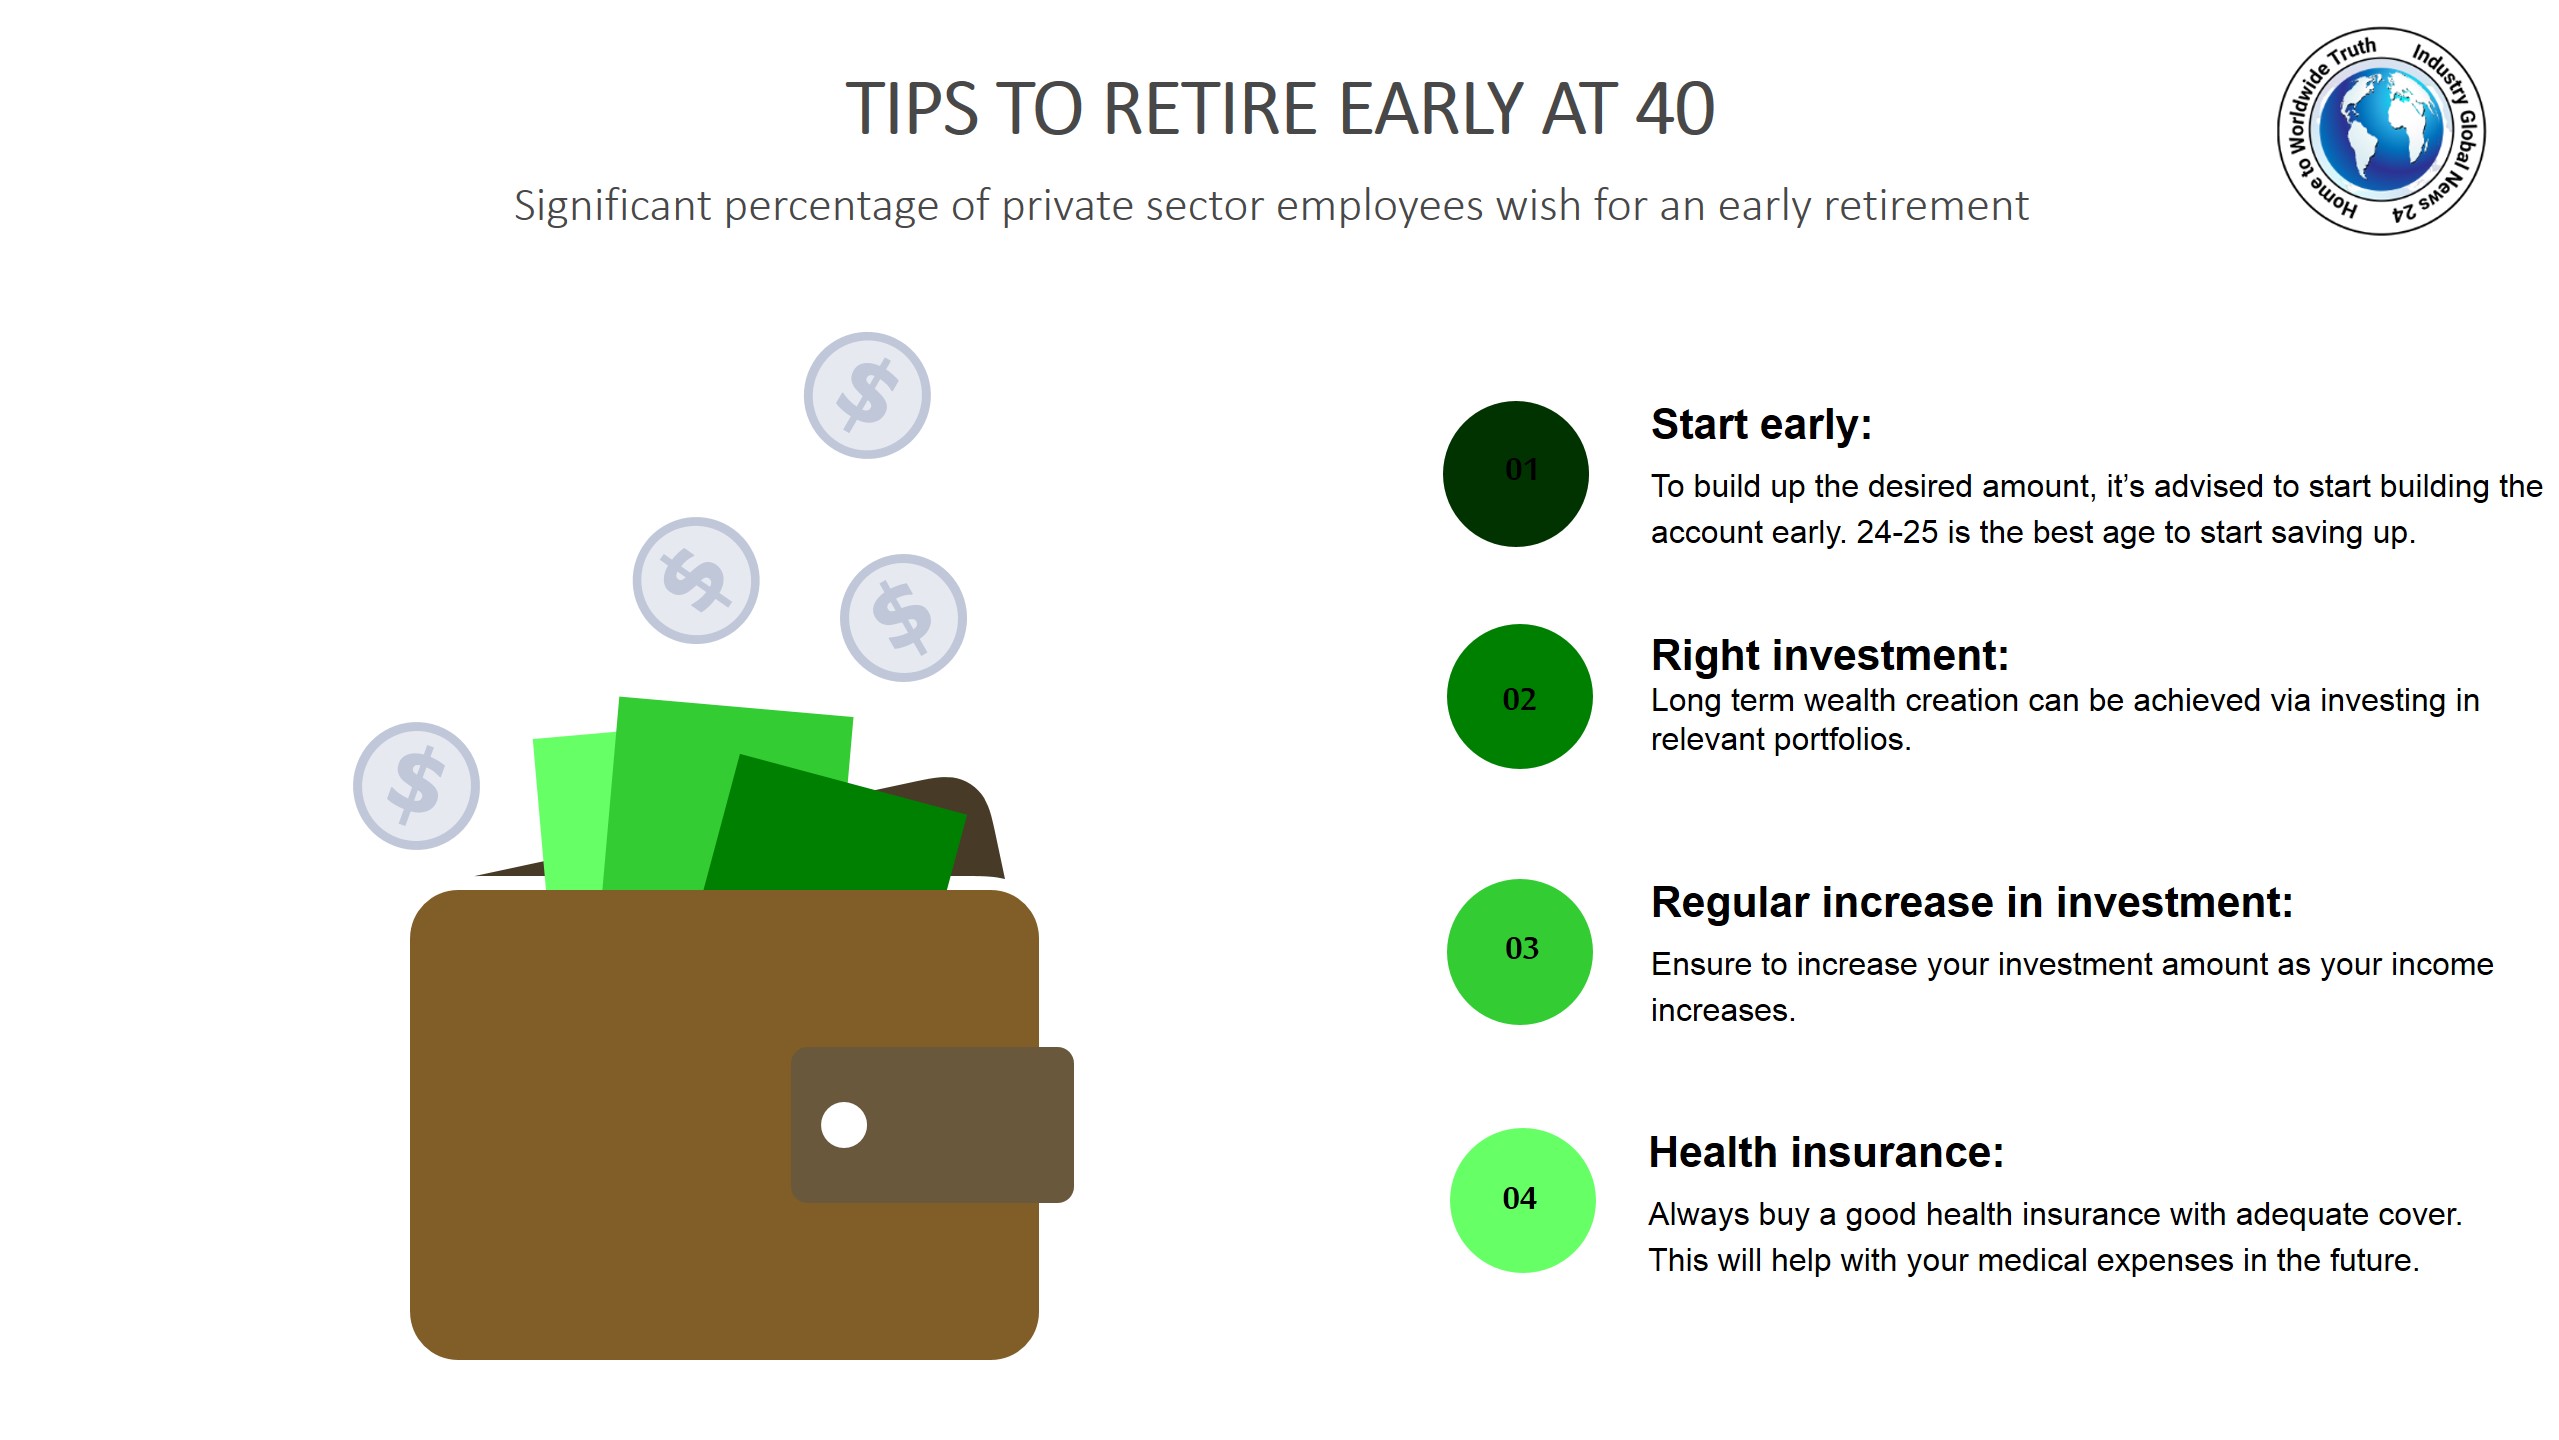 Tips to retire early at 40